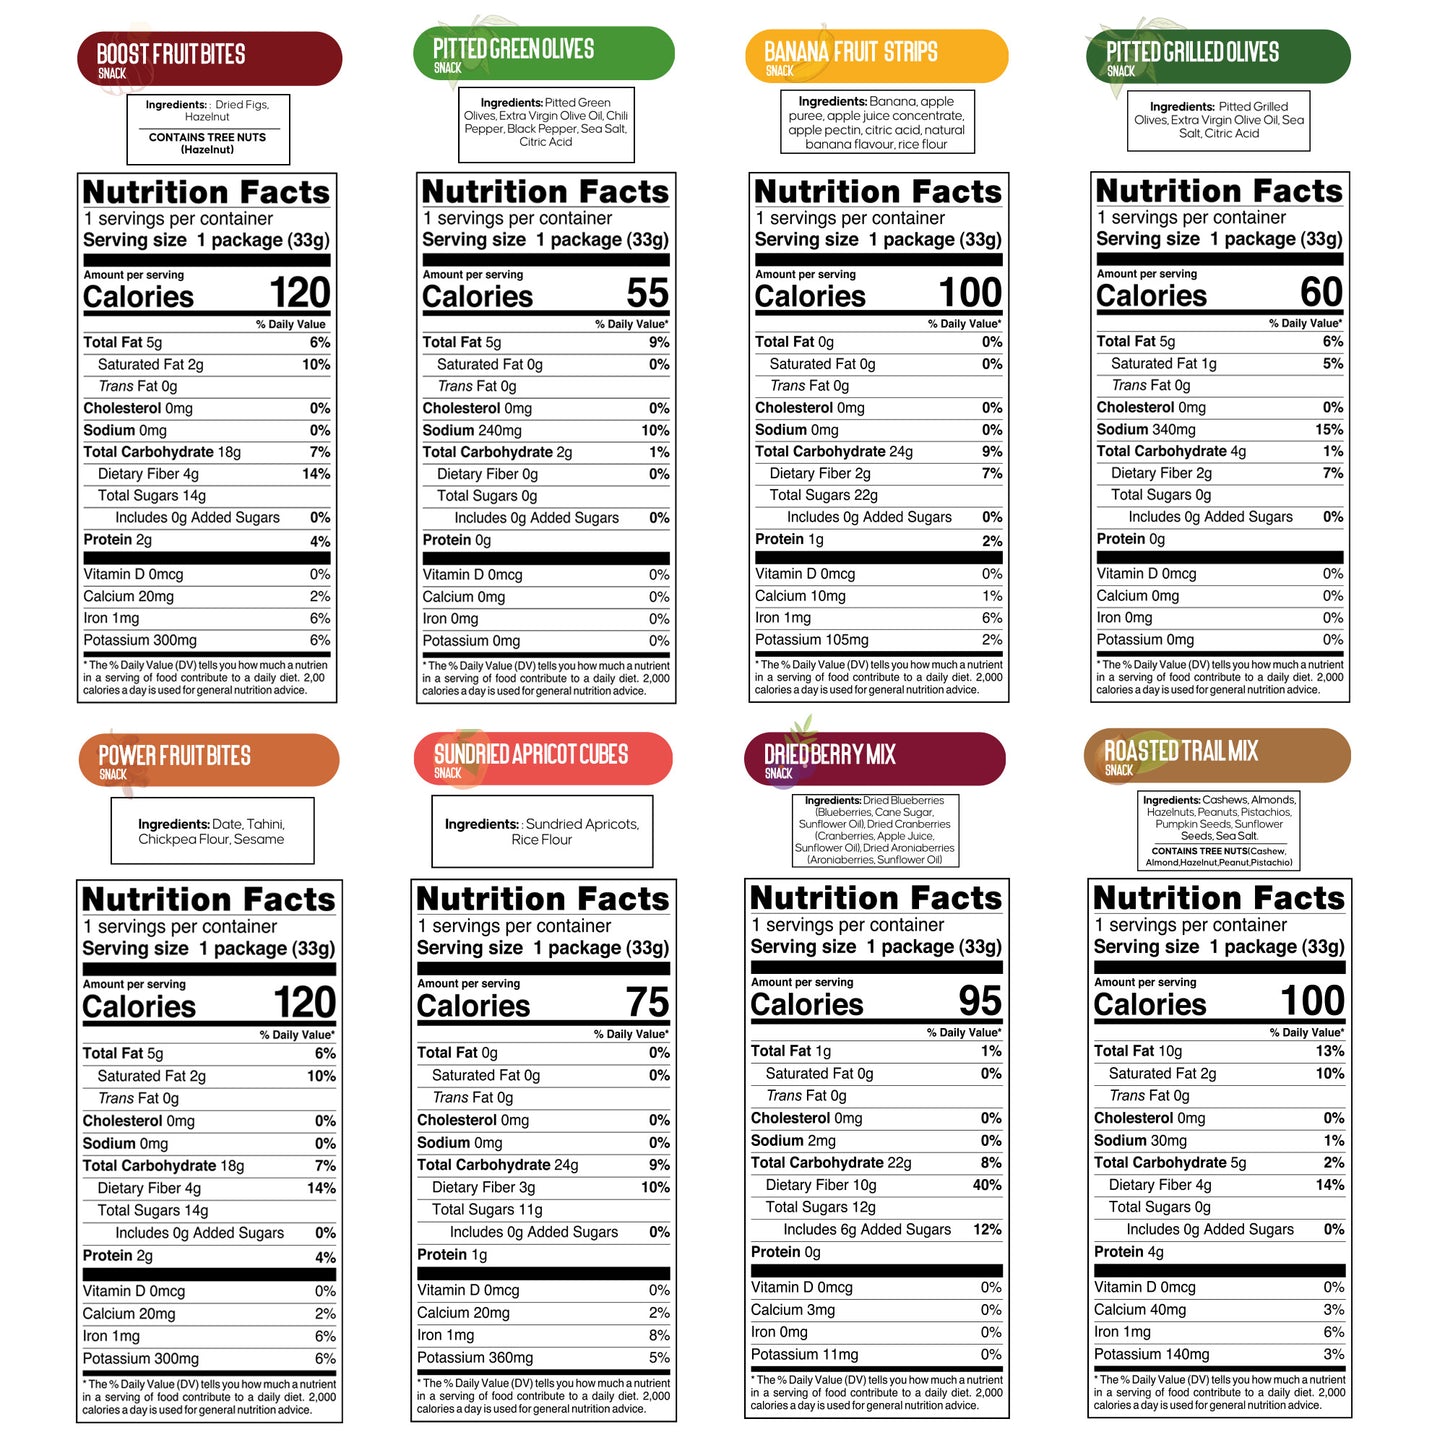 Nutruit Gourmet Healthy Snack Box - 20 Individually Packed Vegan Snacks, Mystery Flavor, Gluten-Free, No Sugar Added, Non-GMO, High Fiber, Plant-Based Protein, Low Calorie, 10 Delicious Flavors, Perfect Gift Box for Health-Conscious Individuals